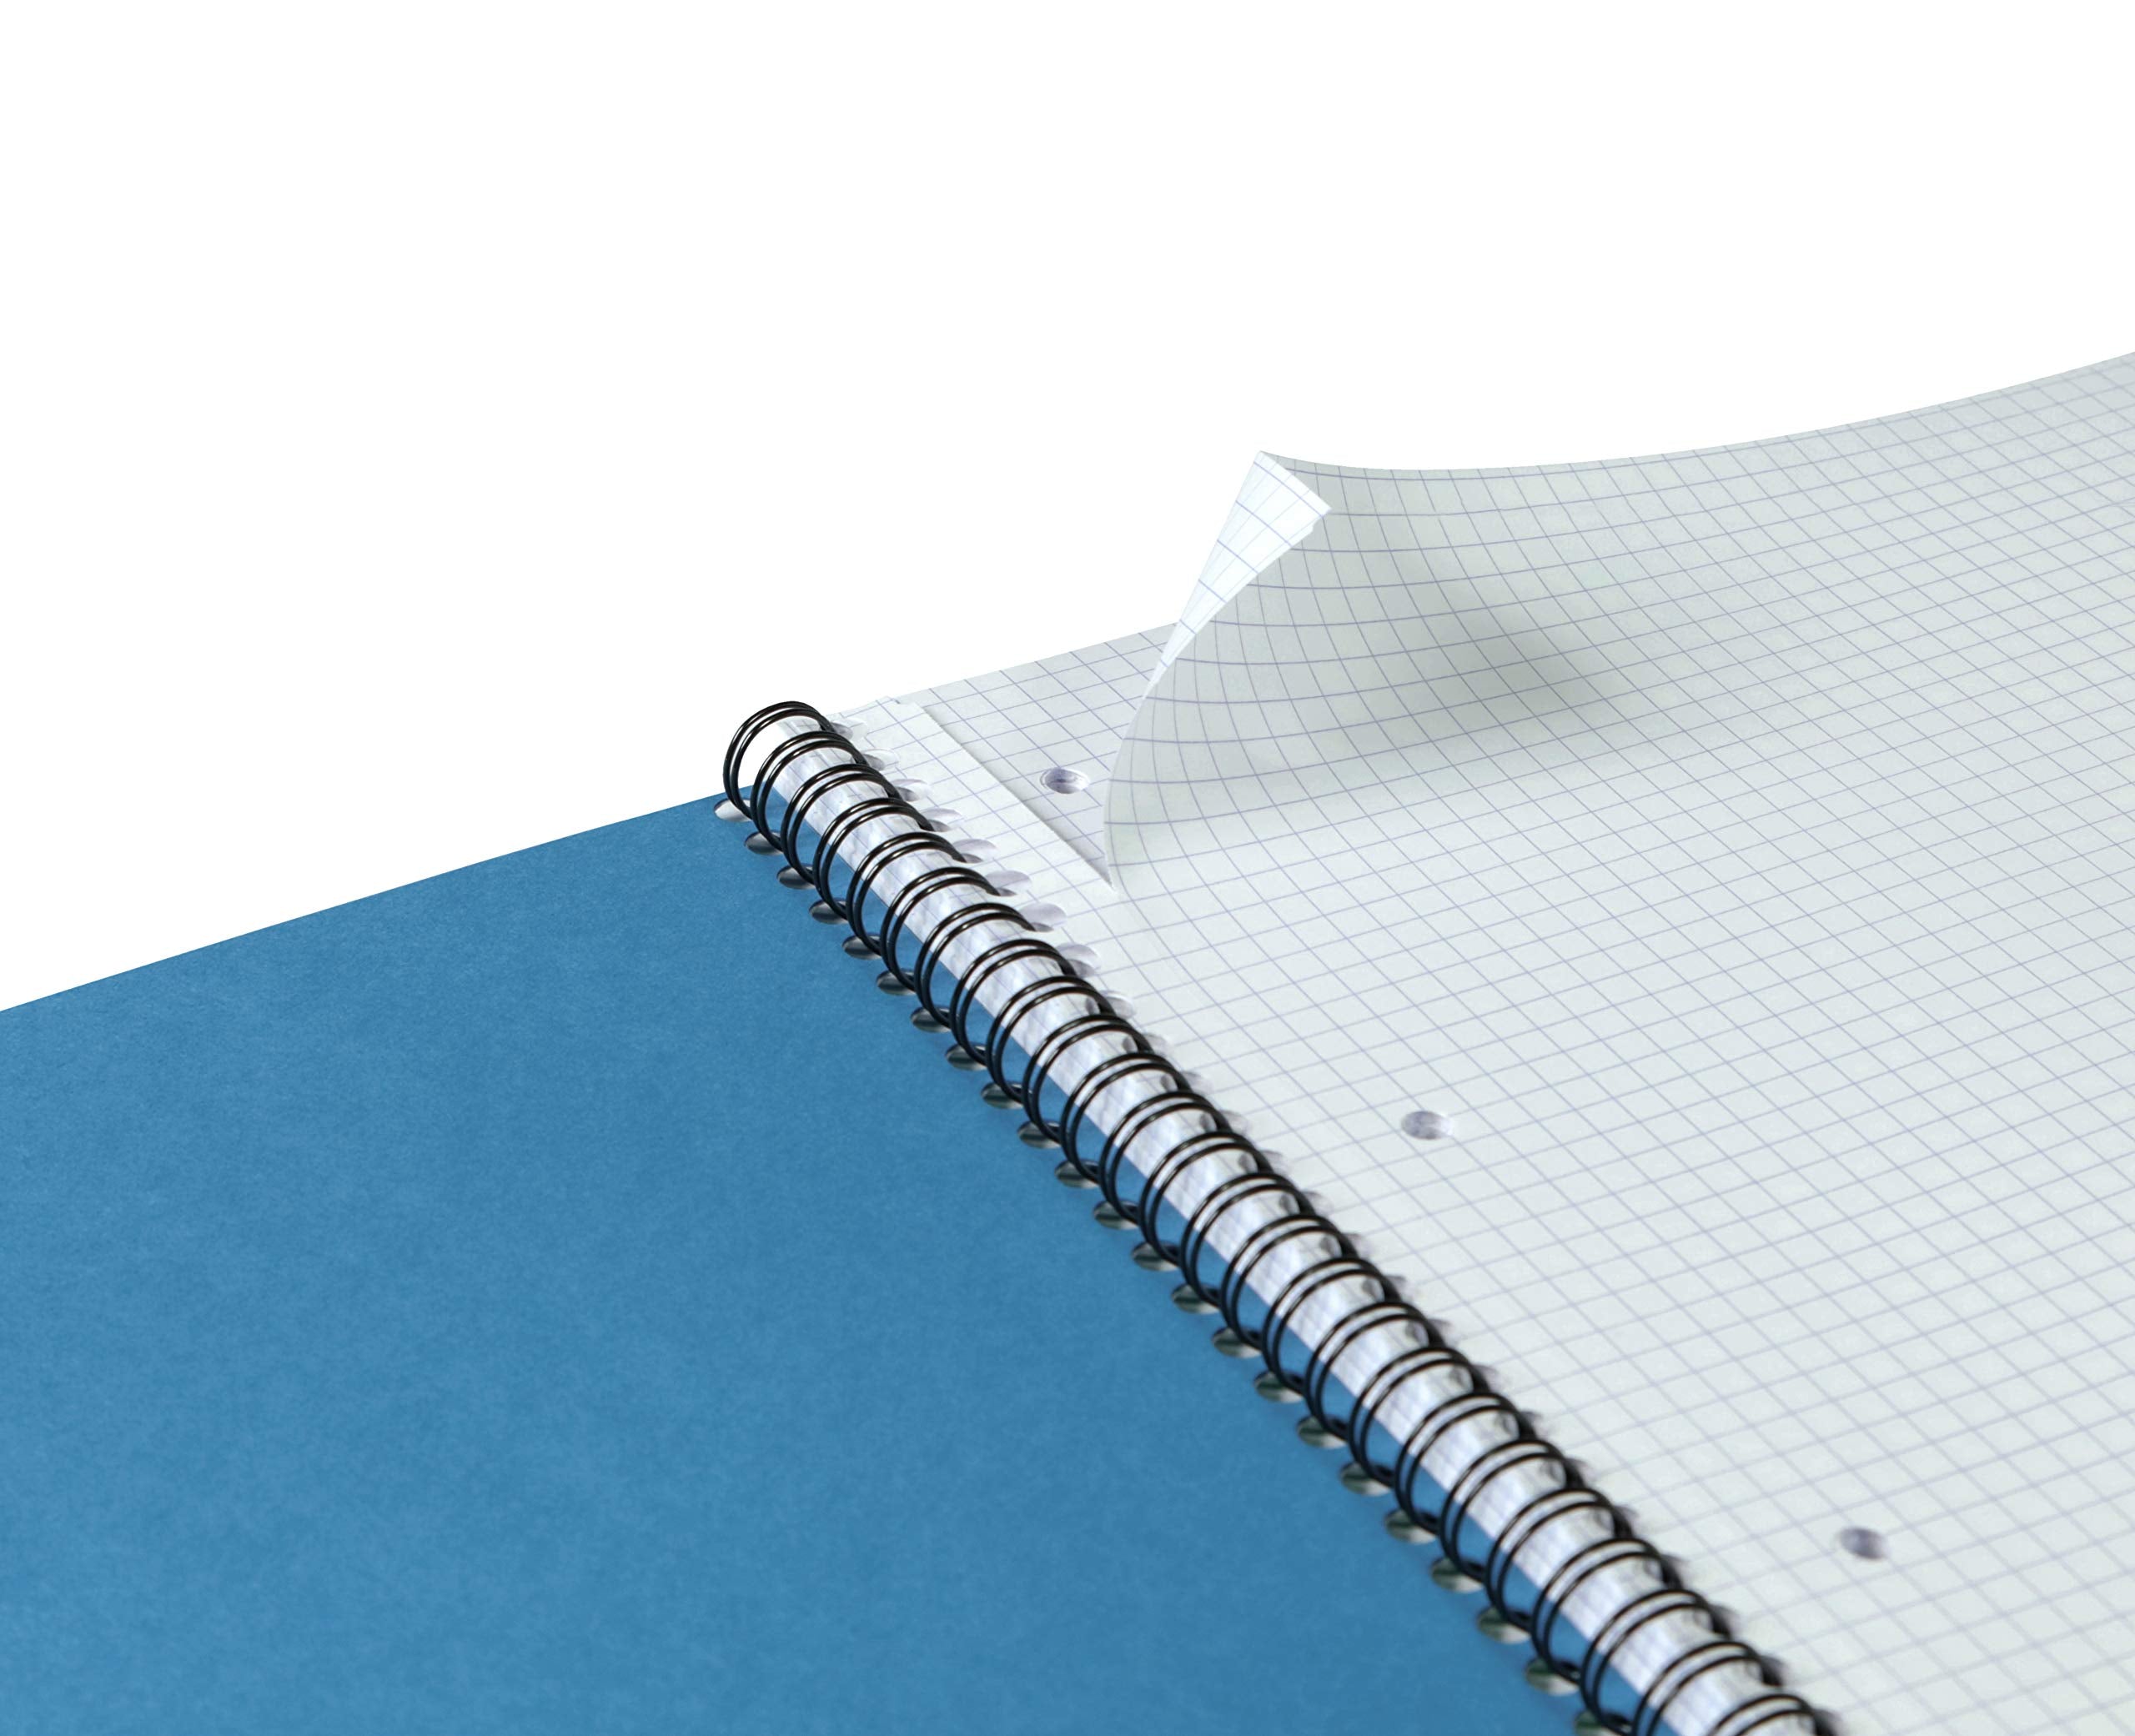 CLAIREFONTAINE Clean'Safe WB Notebook A4+ 90g 80s 5x5 Sq Blue